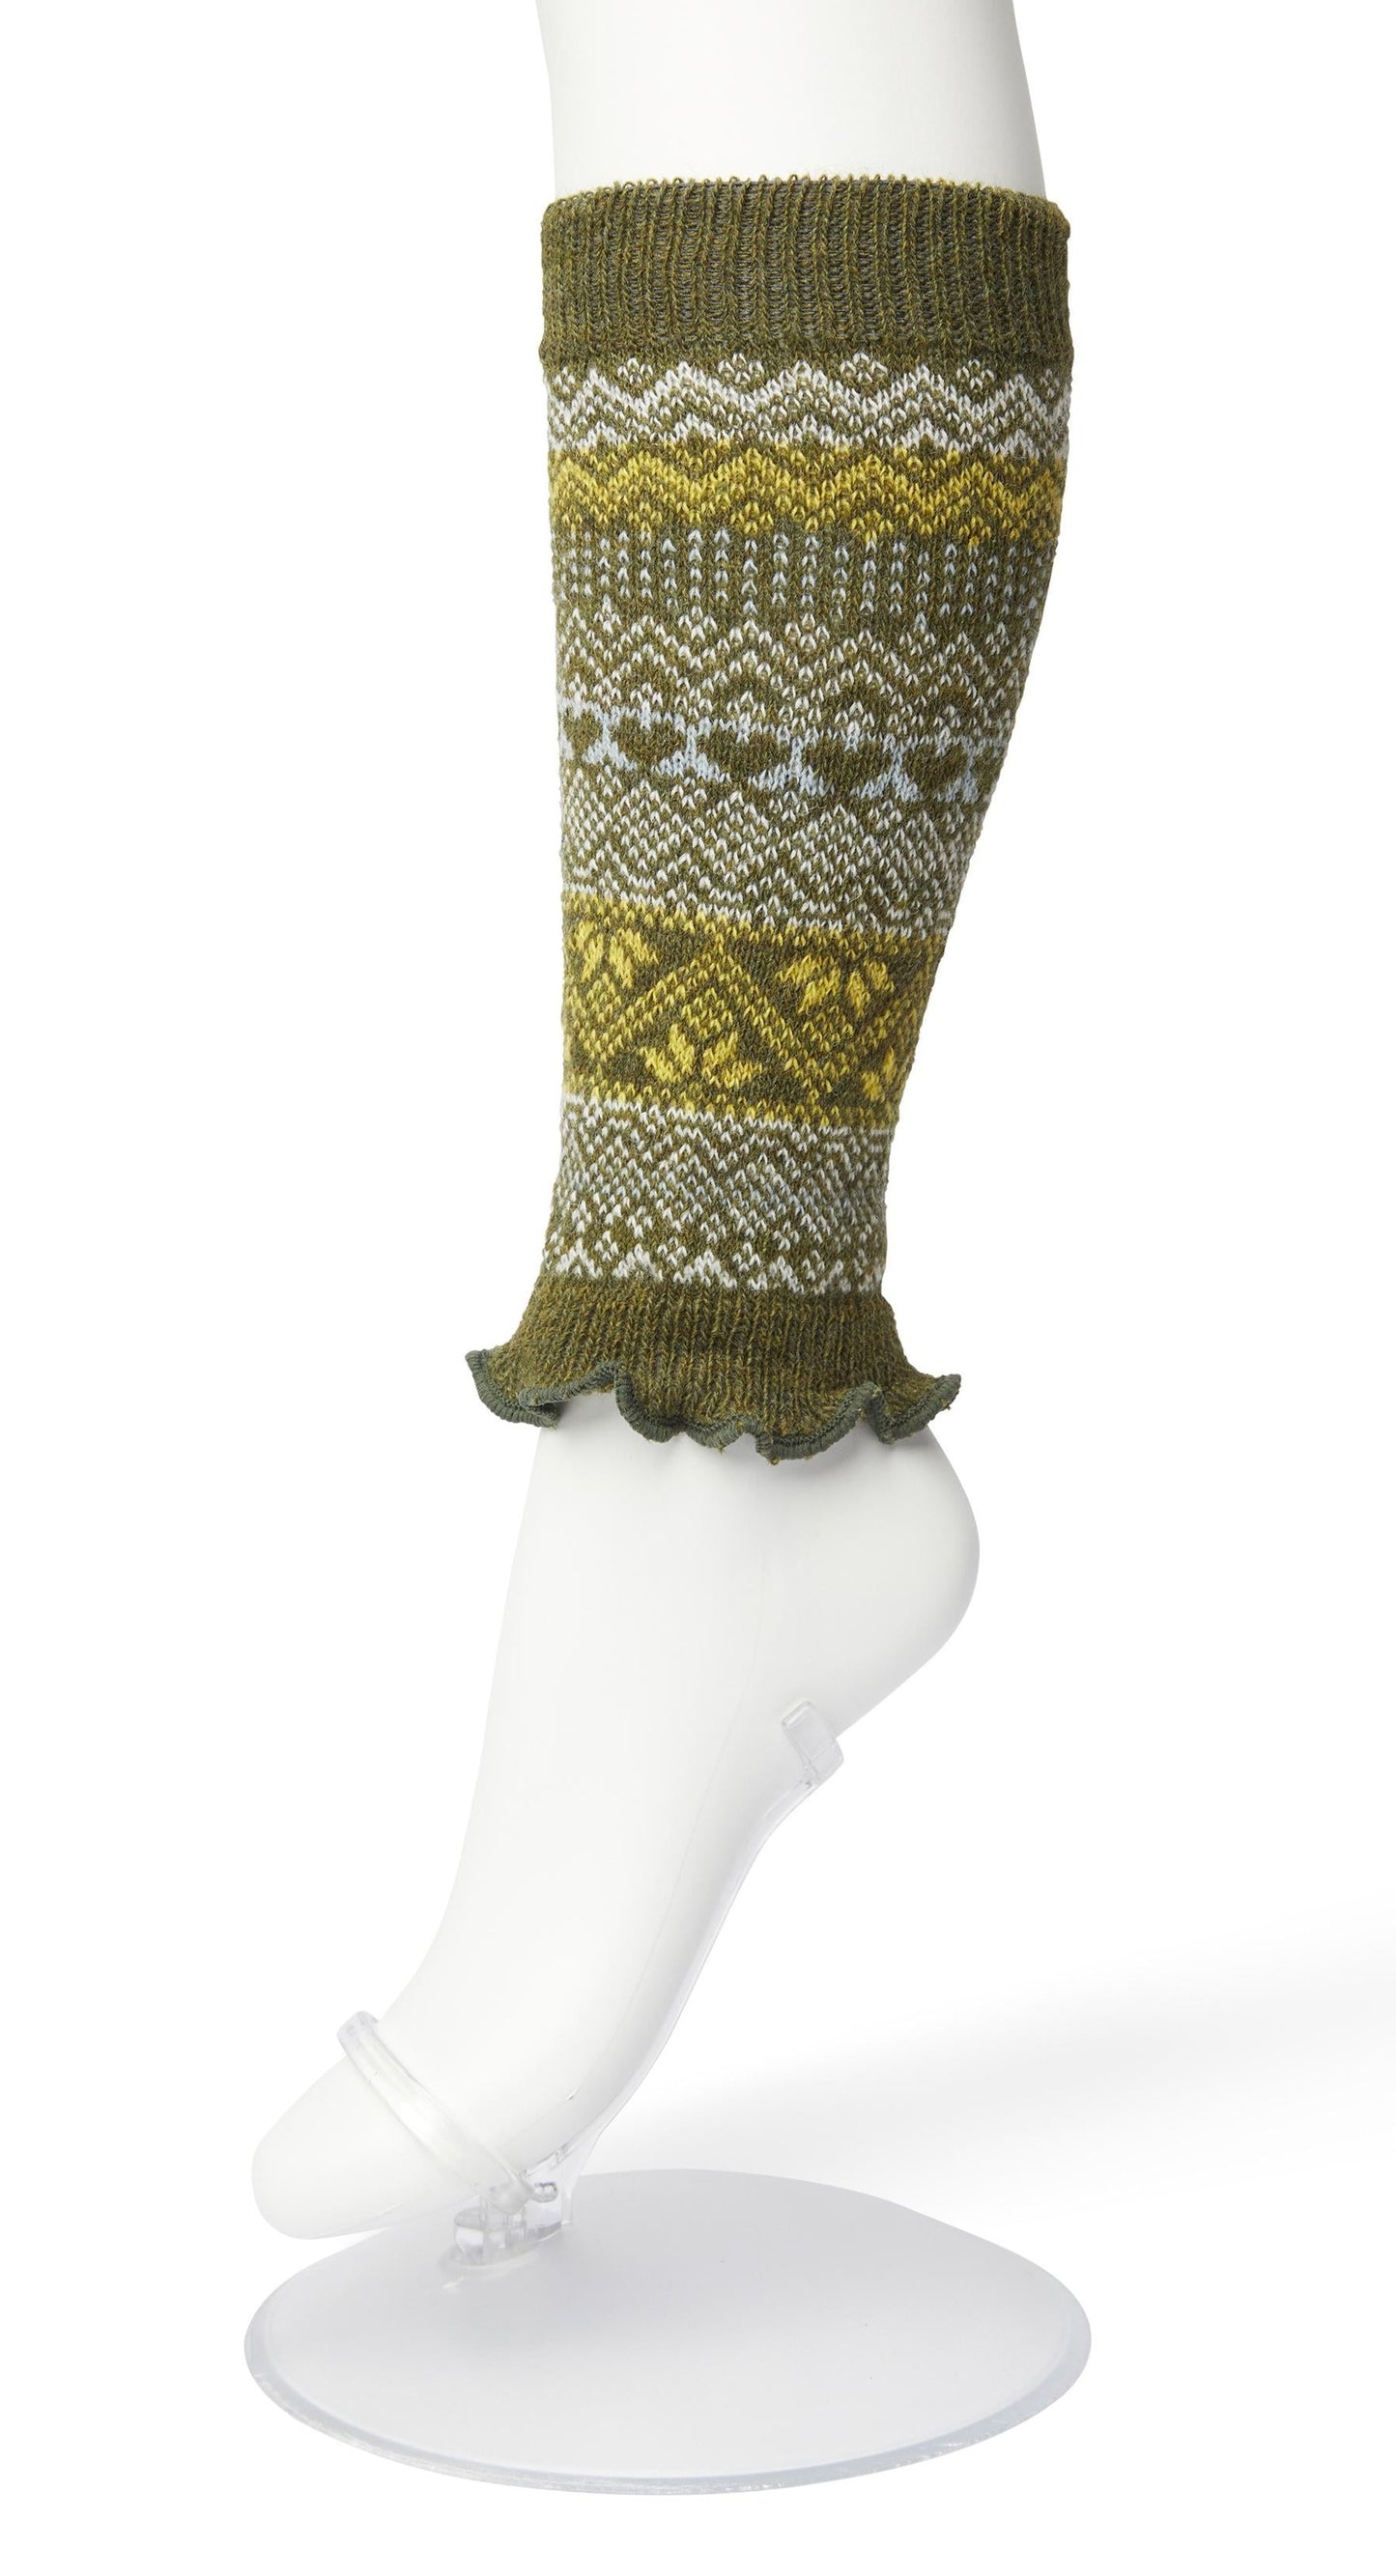 Bonnie Doon BP051729 Folkloric Legwarmers - Olive khaki green, yellow and white warm and soft knee length knitted leg-warmers with a fairisle style pattern, elasticated cuff and frill edge.